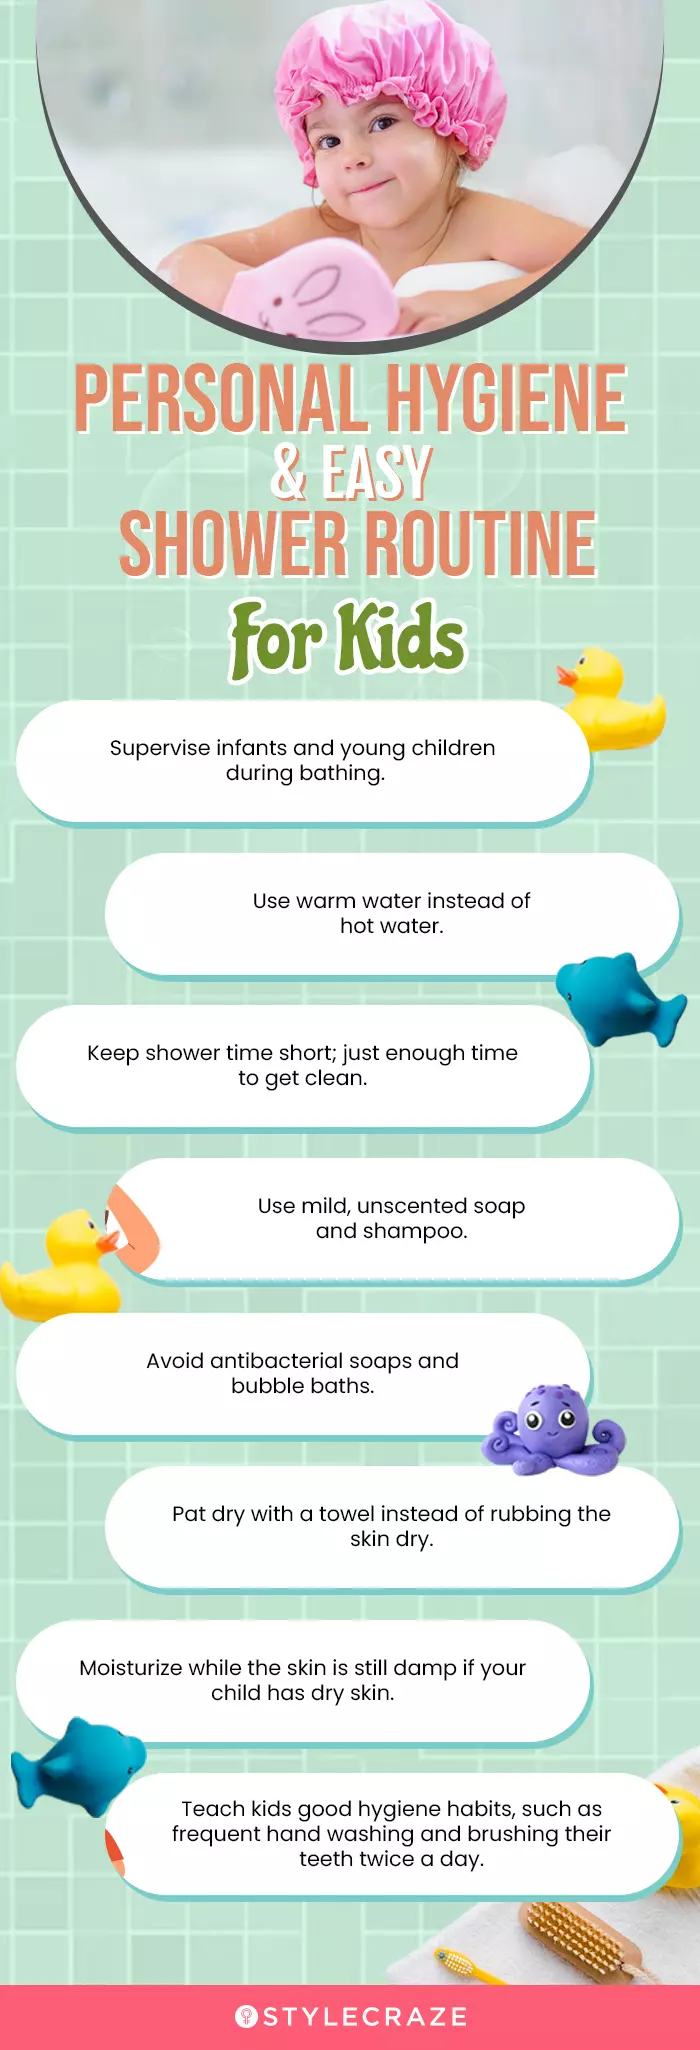 Personal Hygiene & Easy Shower Routine For Kids